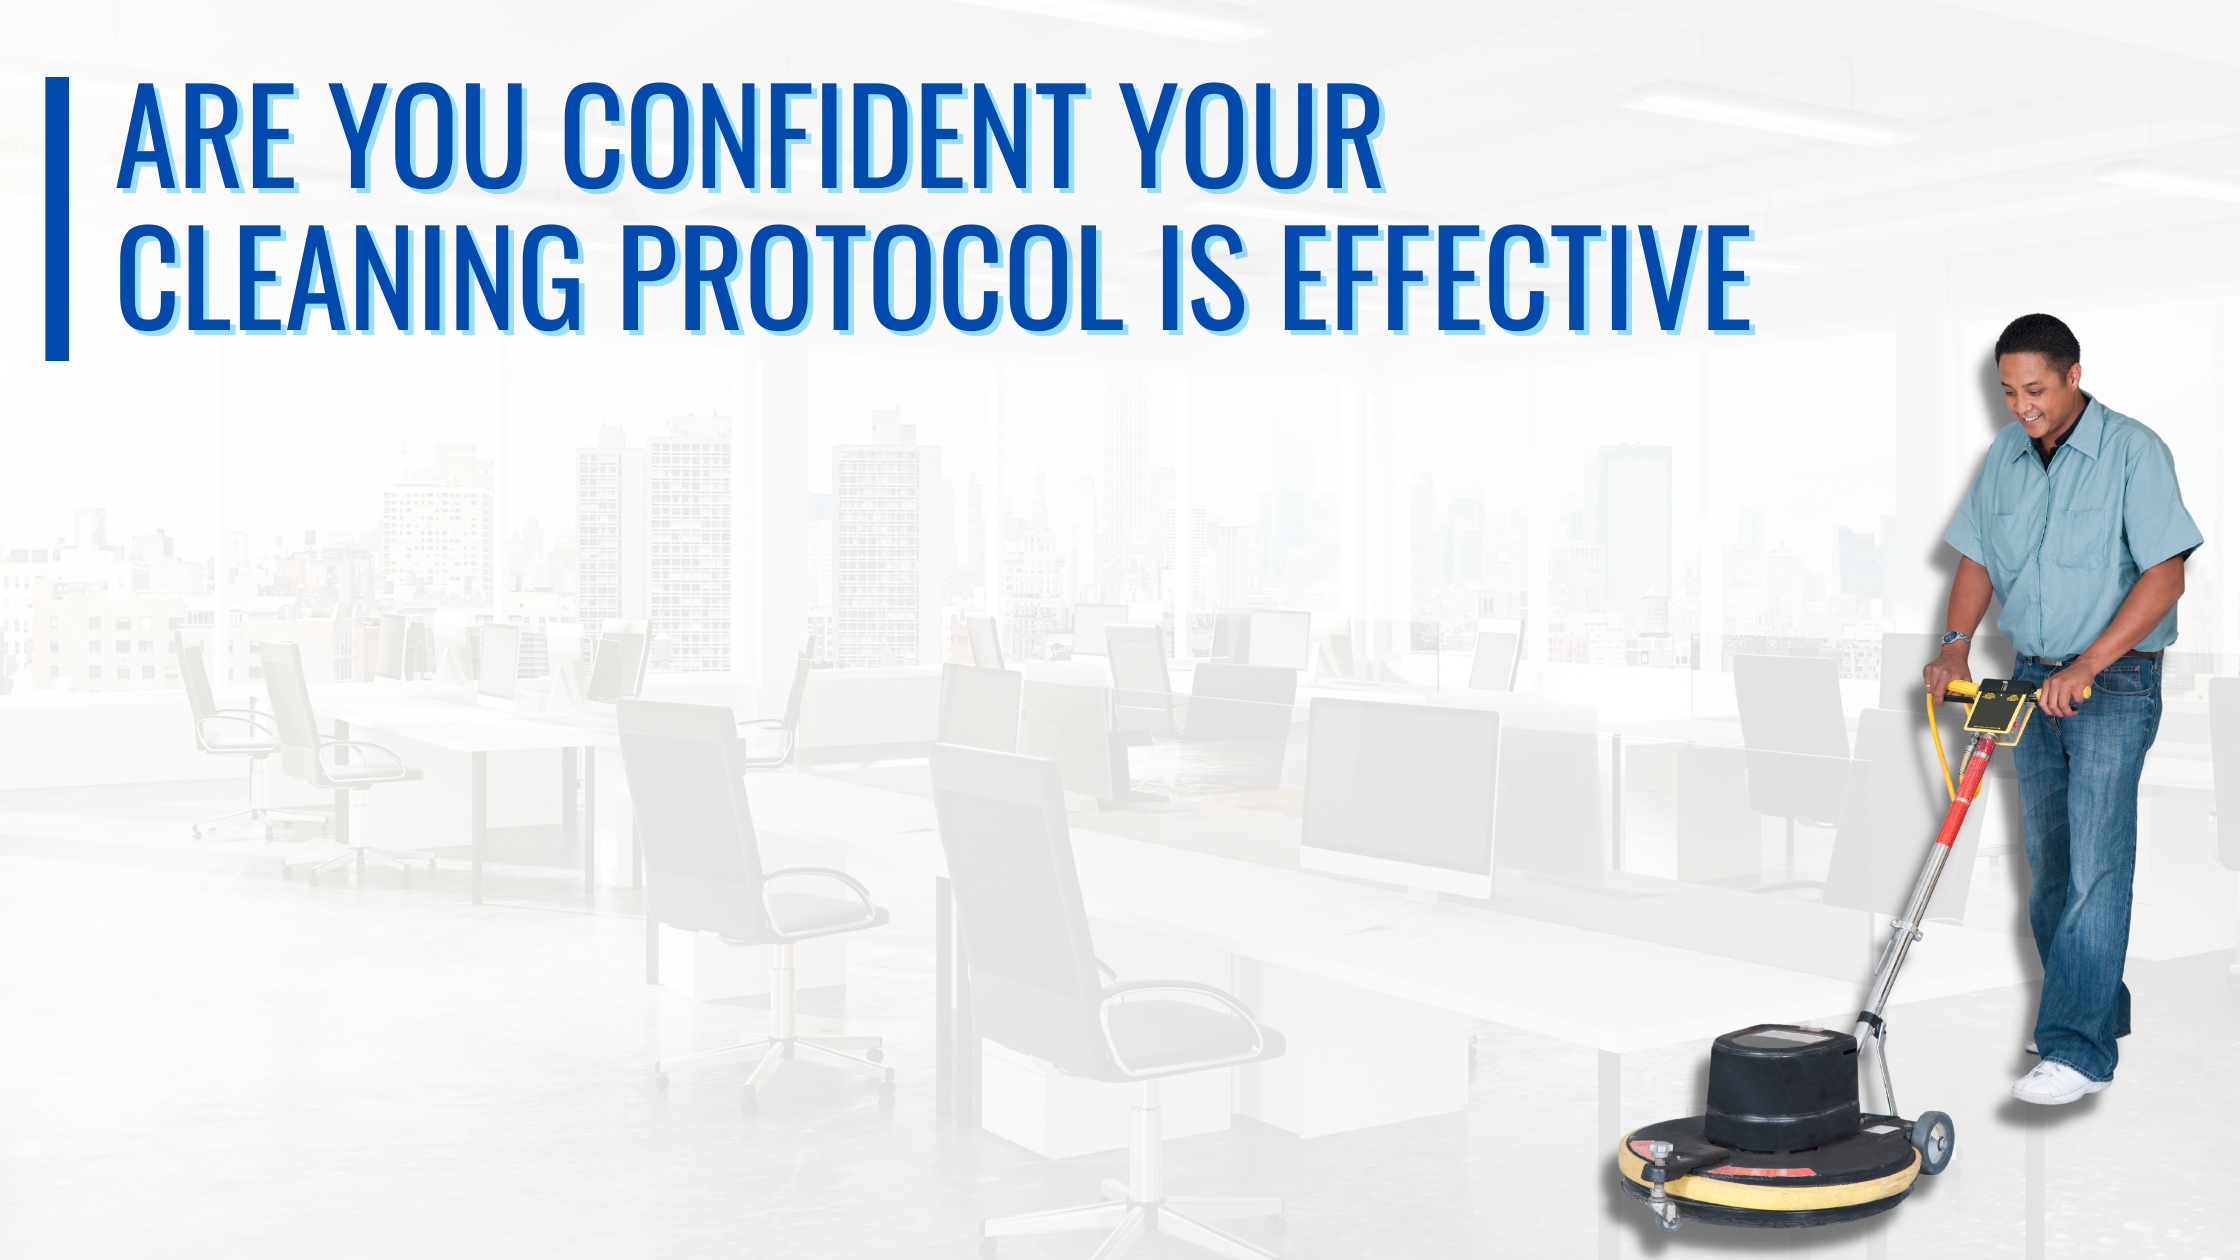 Are You Confident Your Building Cleaning Protocol is Effective?